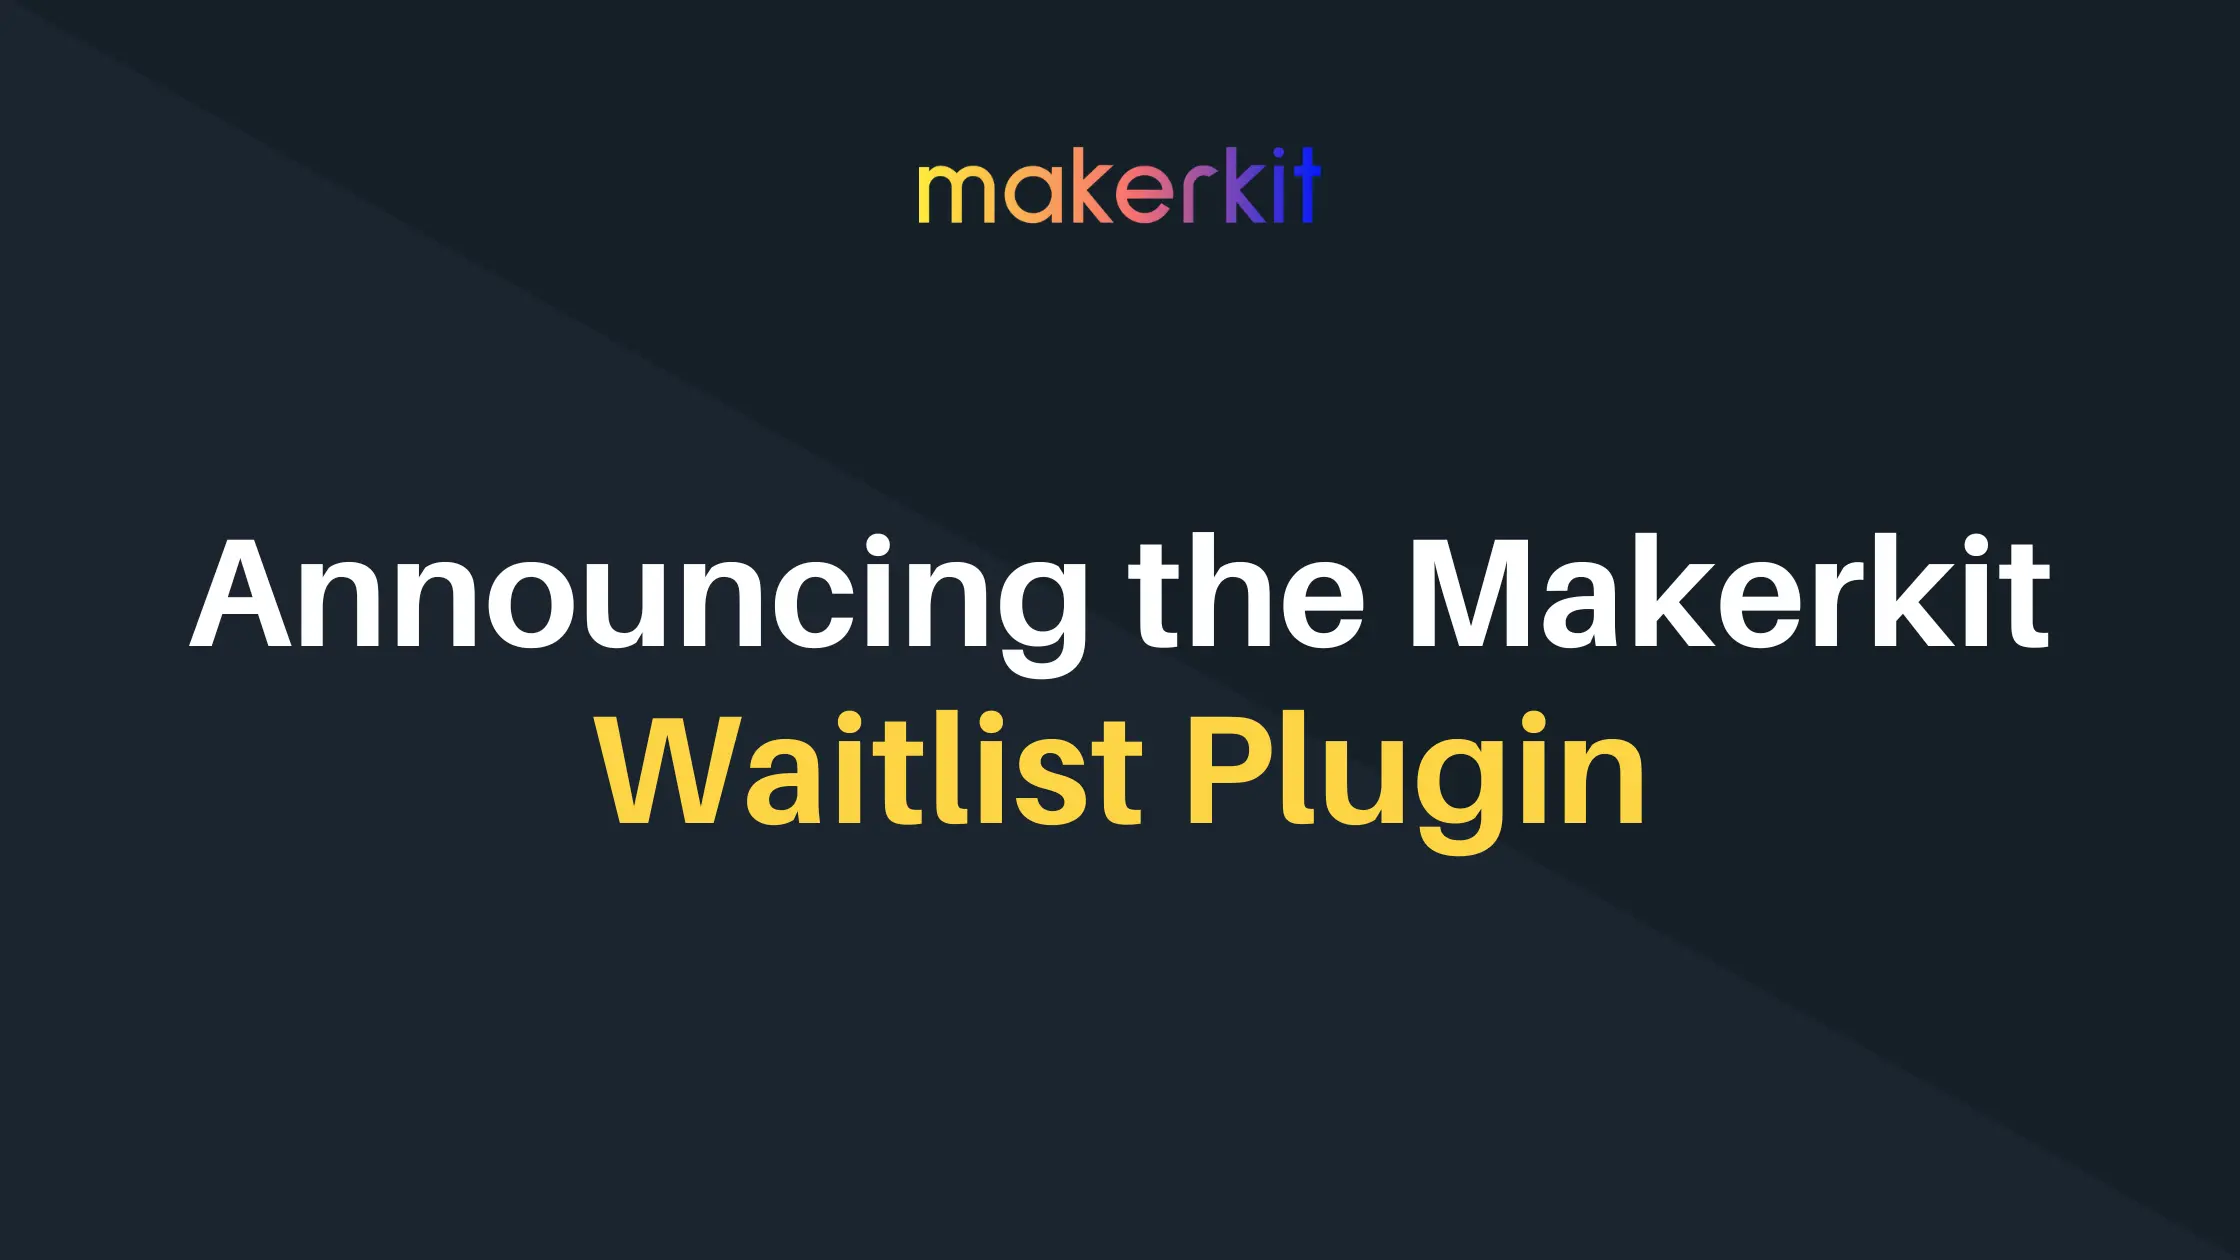 Cover Image for Announcing the Waitlist plugin